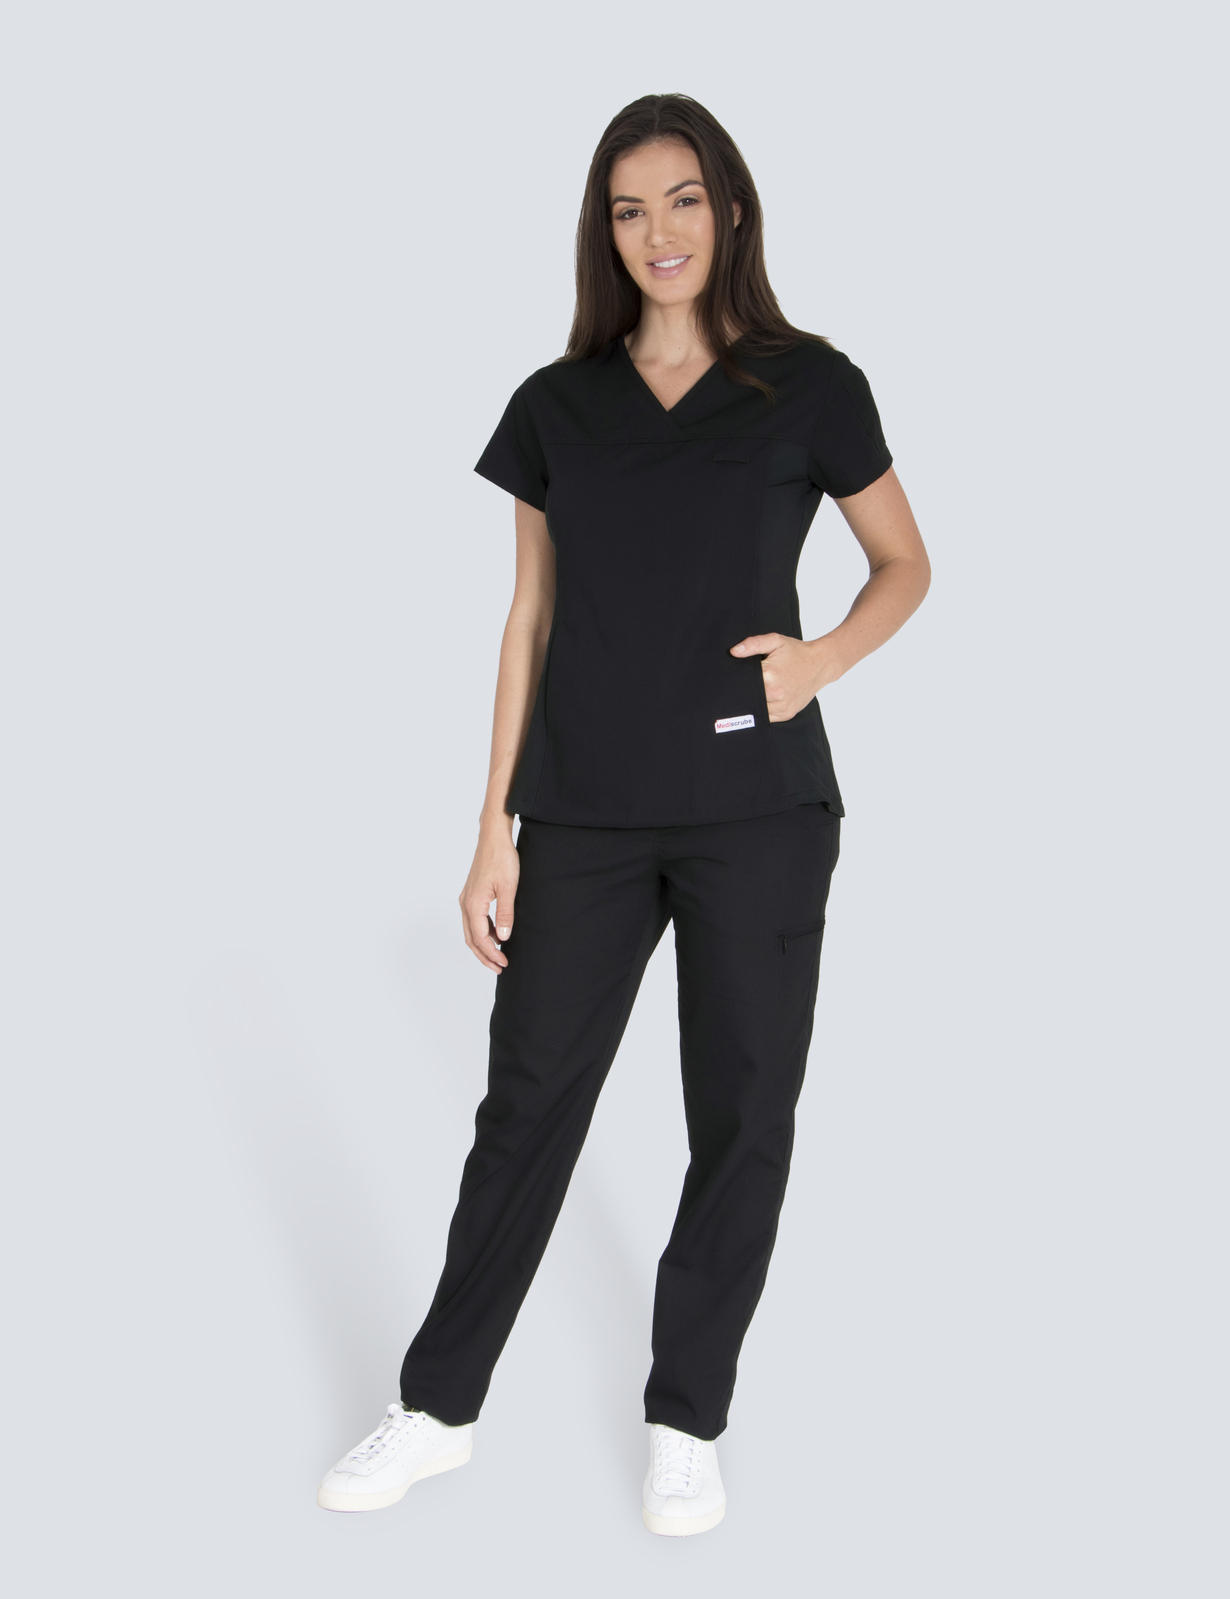 Redland Hospital - Medical Imaging (Women's Fit Spandex Scrub Top and Cargo Pants in Black incl Logos)